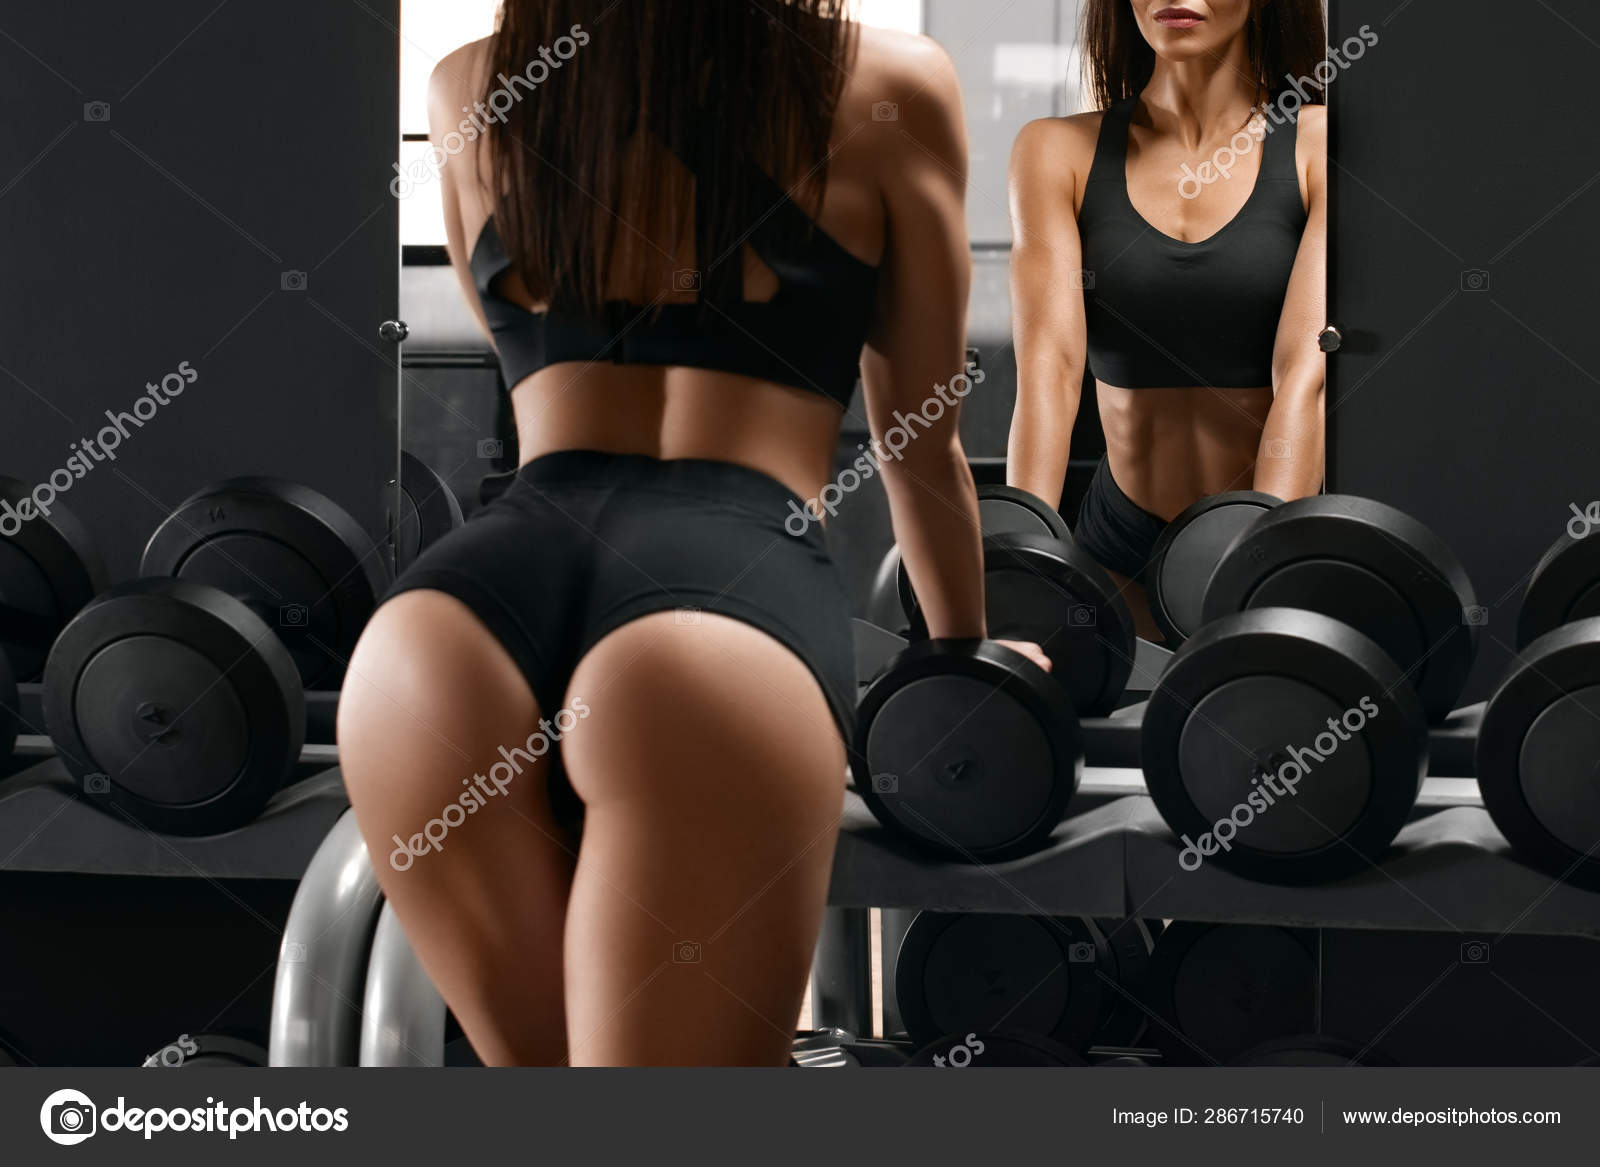 Ass fit chick The 50